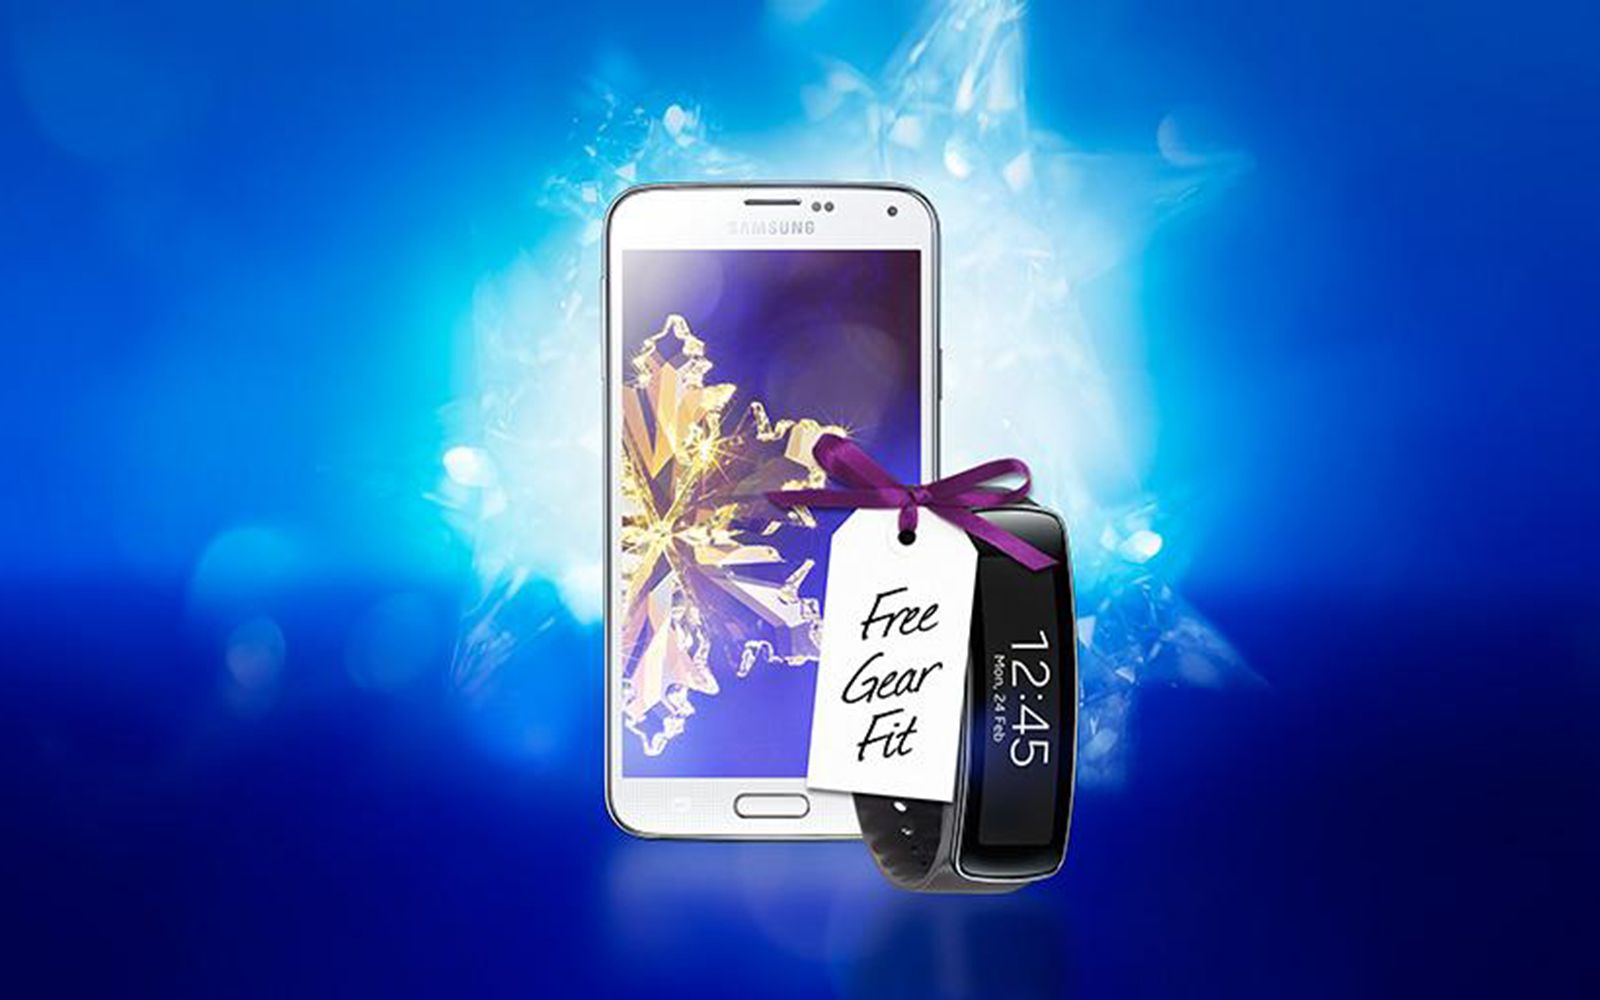 buy a reduced price samsung galaxy s5 and get a gear fit free today only image 1